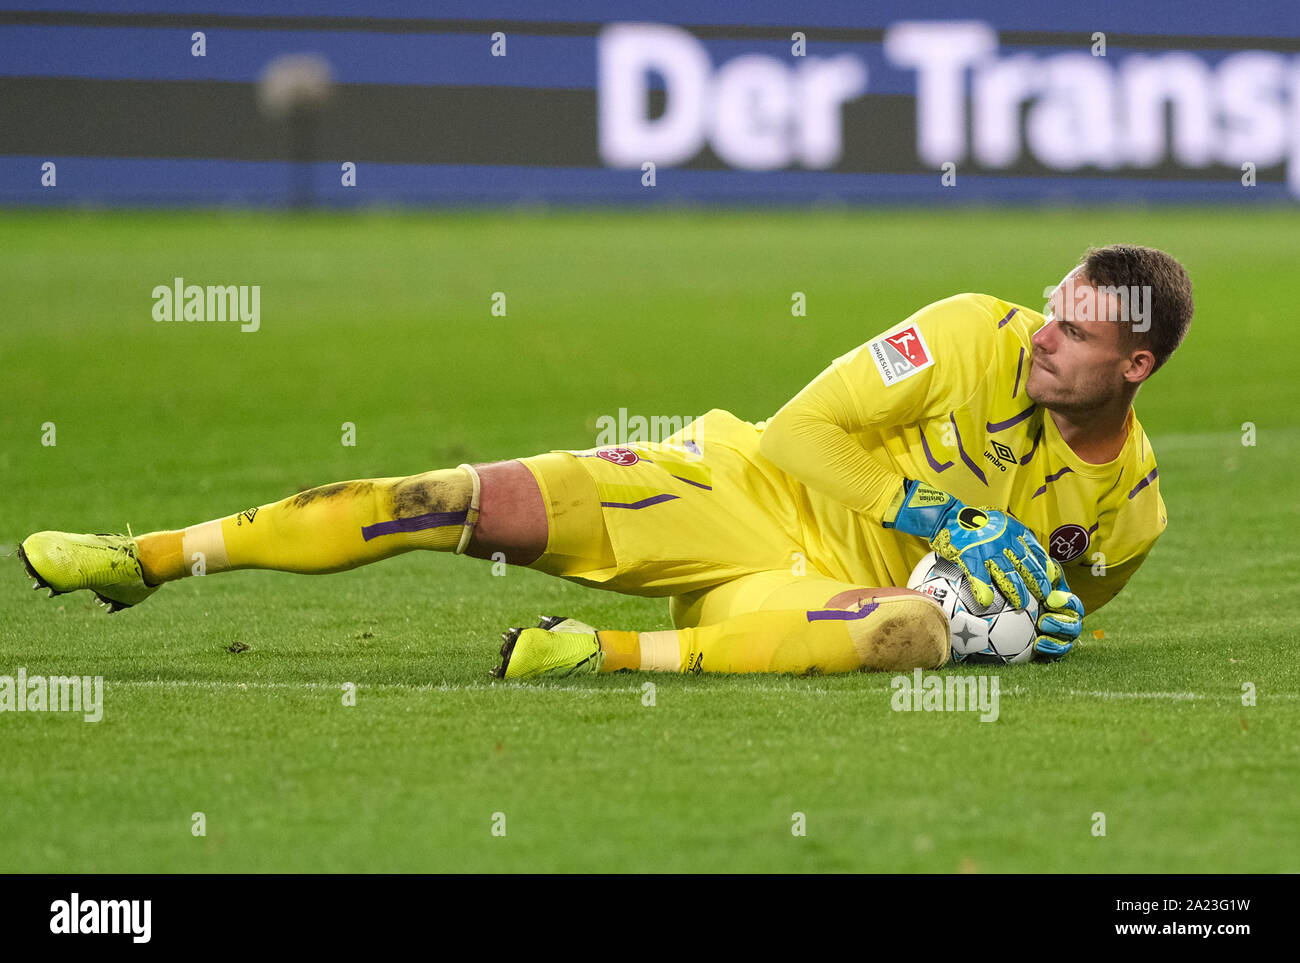 Hanover, Germany. 30th Sep, 2019. Soccer: 2nd Bundesliga, 8th matchday: Hannover 96 - 1st FC Nürnberg in the HDI-Arena in Hannover. Nuremberg goalkeeper Christian Mathenia is in goal. Credit: Peter Steffen/dpa - IMPORTANT NOTE: In accordance with the requirements of the DFL Deutsche Fußball Liga or the DFB Deutscher Fußball-Bund, it is prohibited to use or have used photographs taken in the stadium and/or the match in the form of sequence images and/or video-like photo sequences./dpa/Alamy Live News Stock Photo